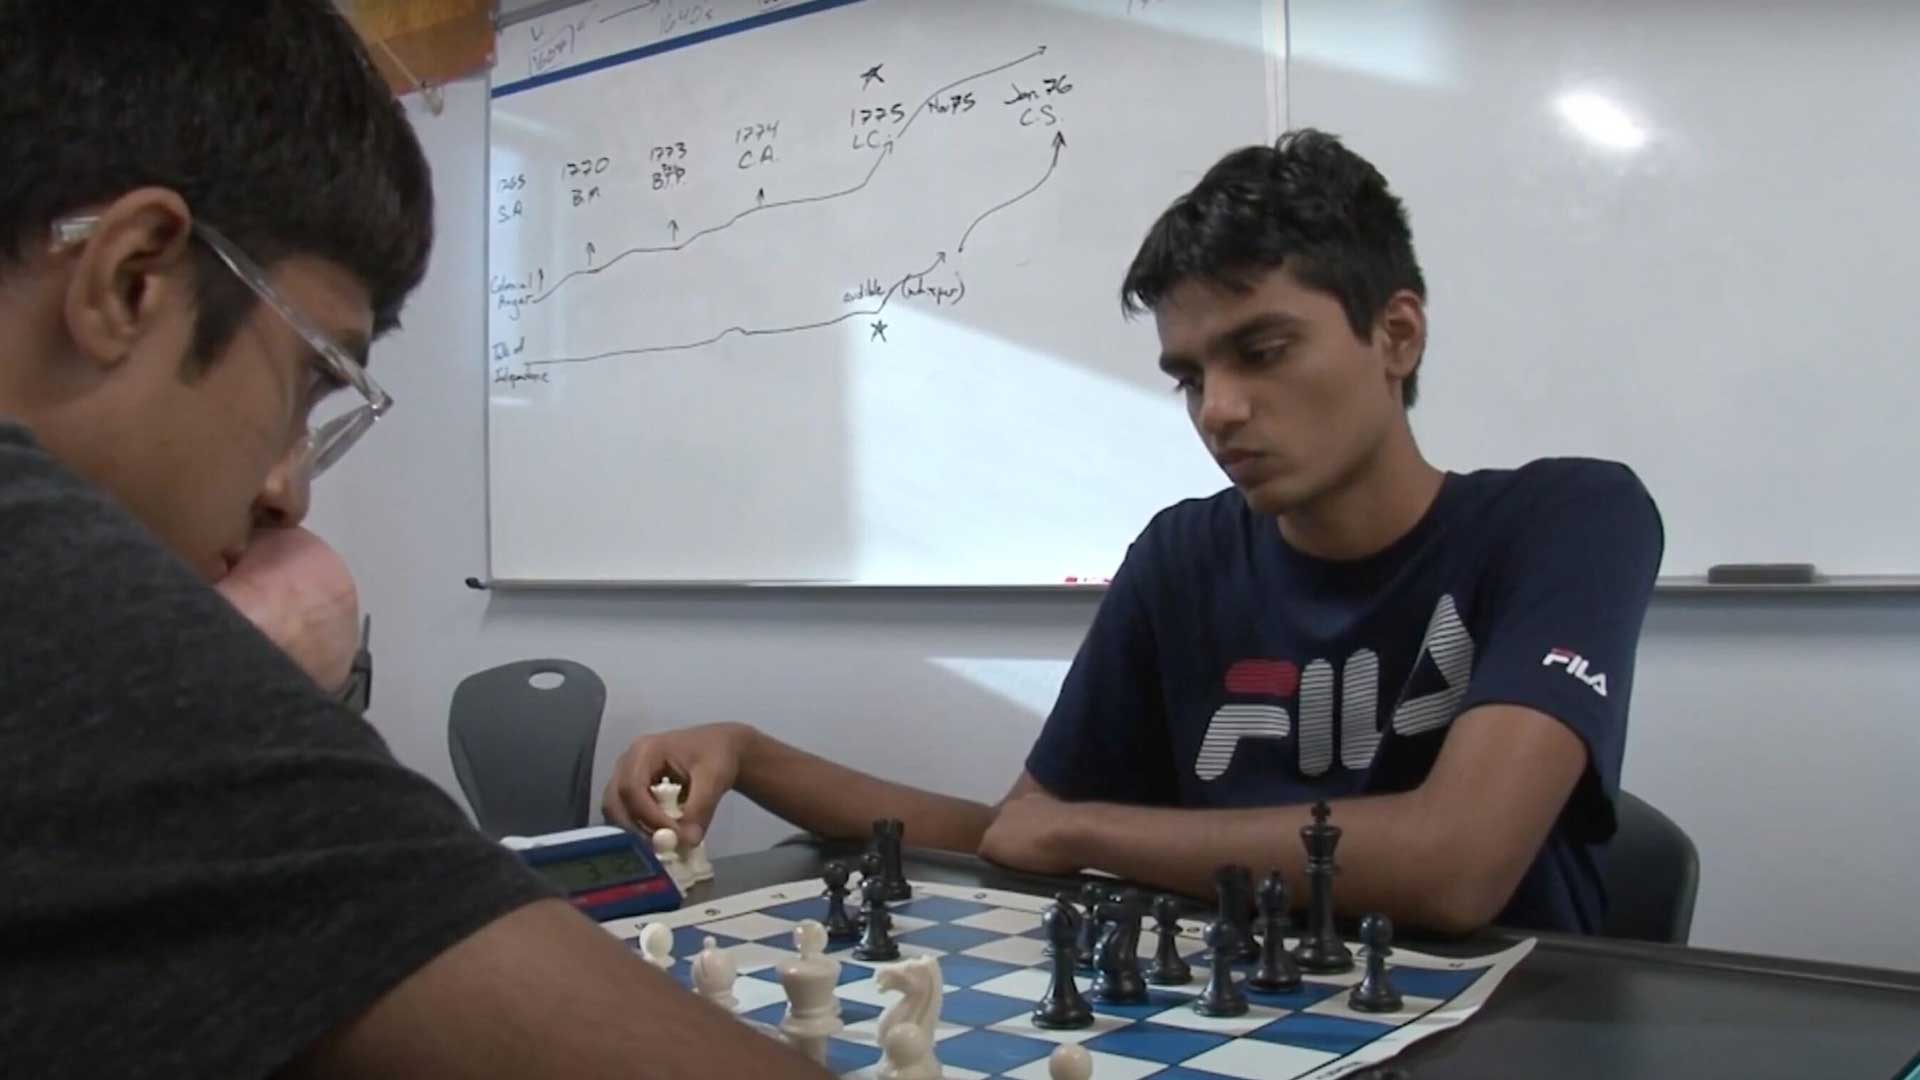 A budding prodigy, BASIS Chandler junior Sandeep Sethuraman aims to lead the school’s chess team to a third state championship as caption.